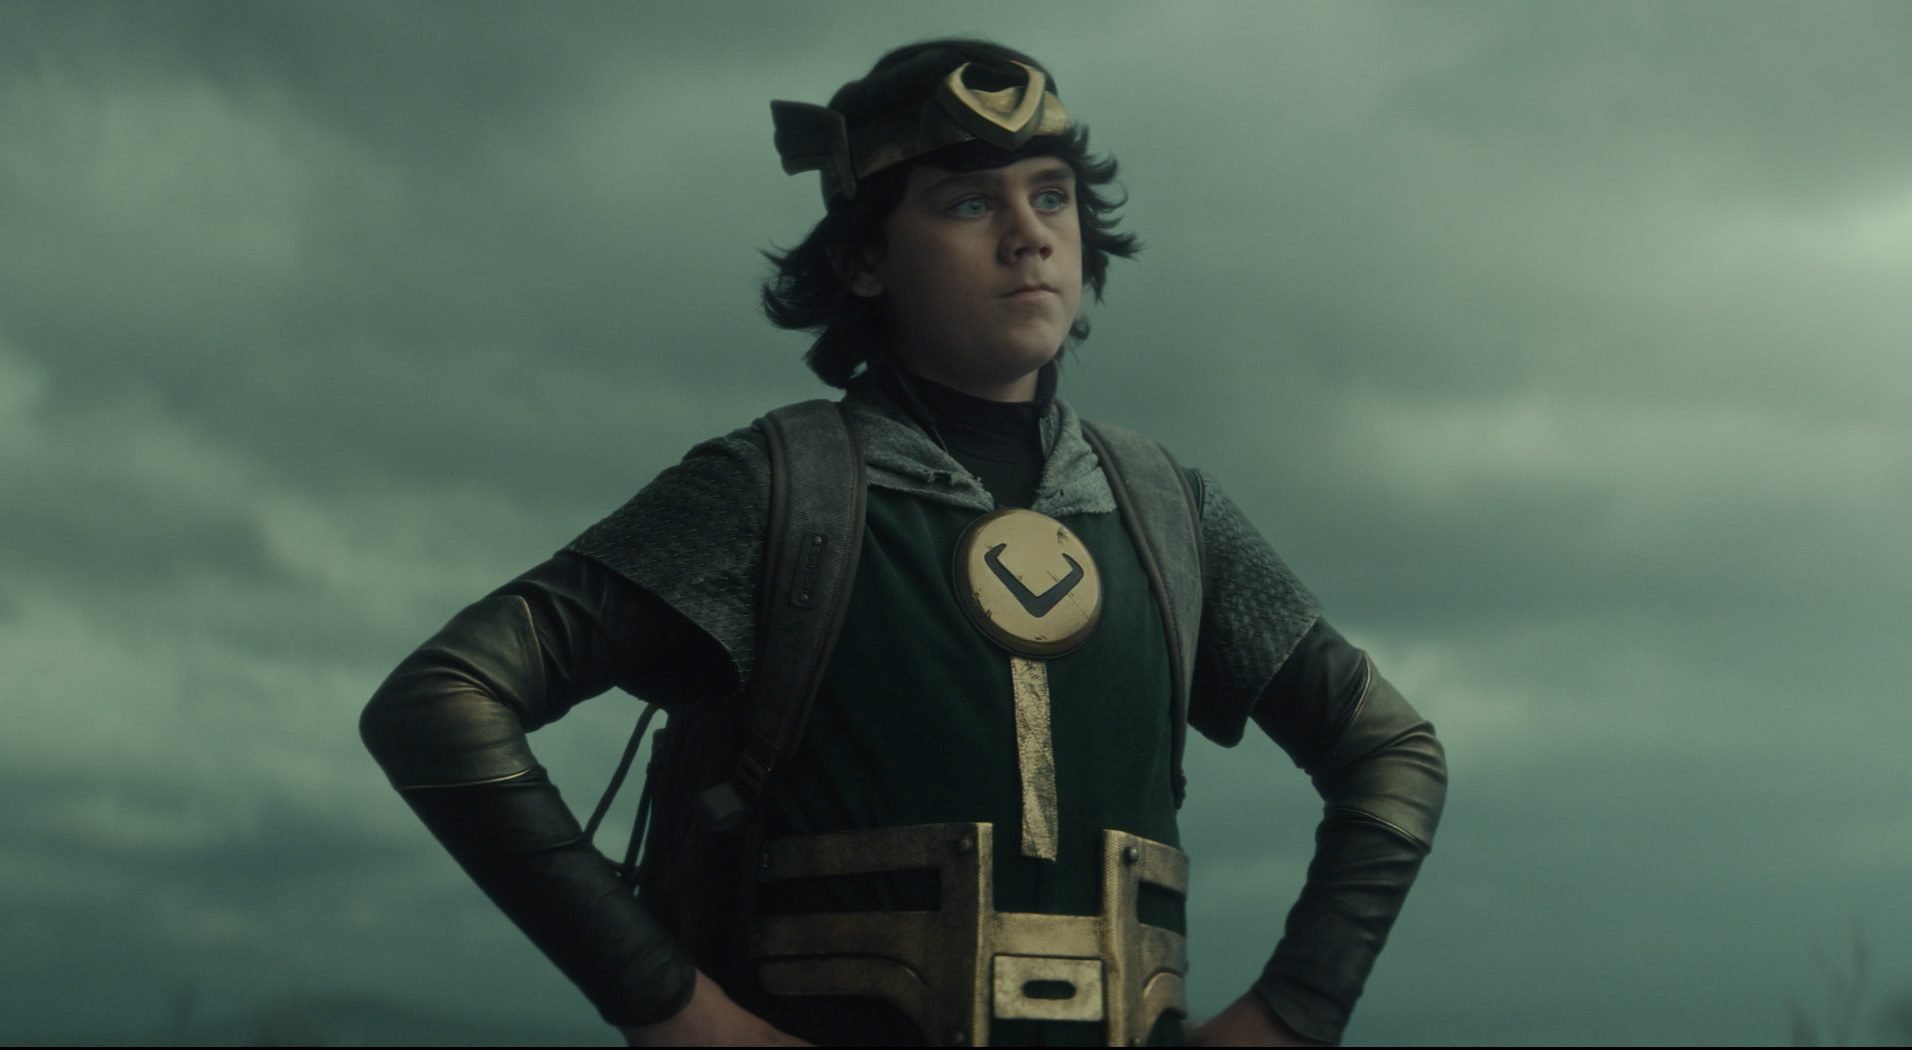 Kid Loki (Jack Veal) standing with his hands on his hips